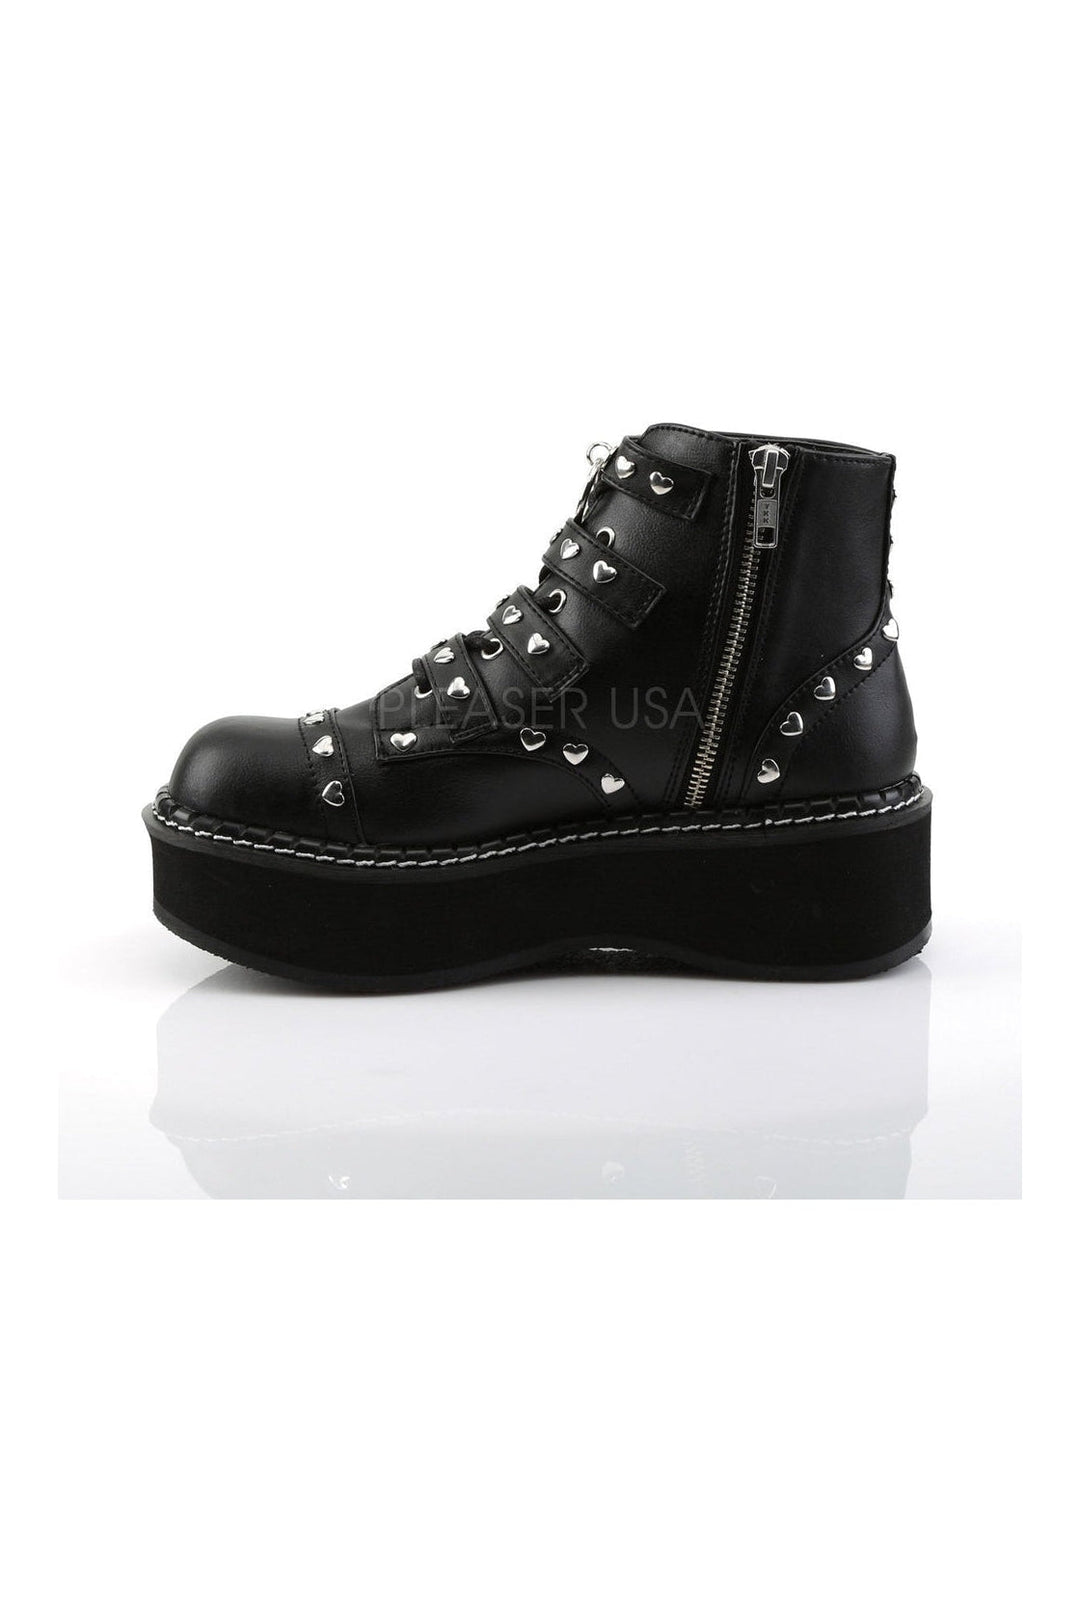 EMILY-315 Demonia Ankle Boot | Black Faux Leather-Demonia-Ankle Boots-SEXYSHOES.COM